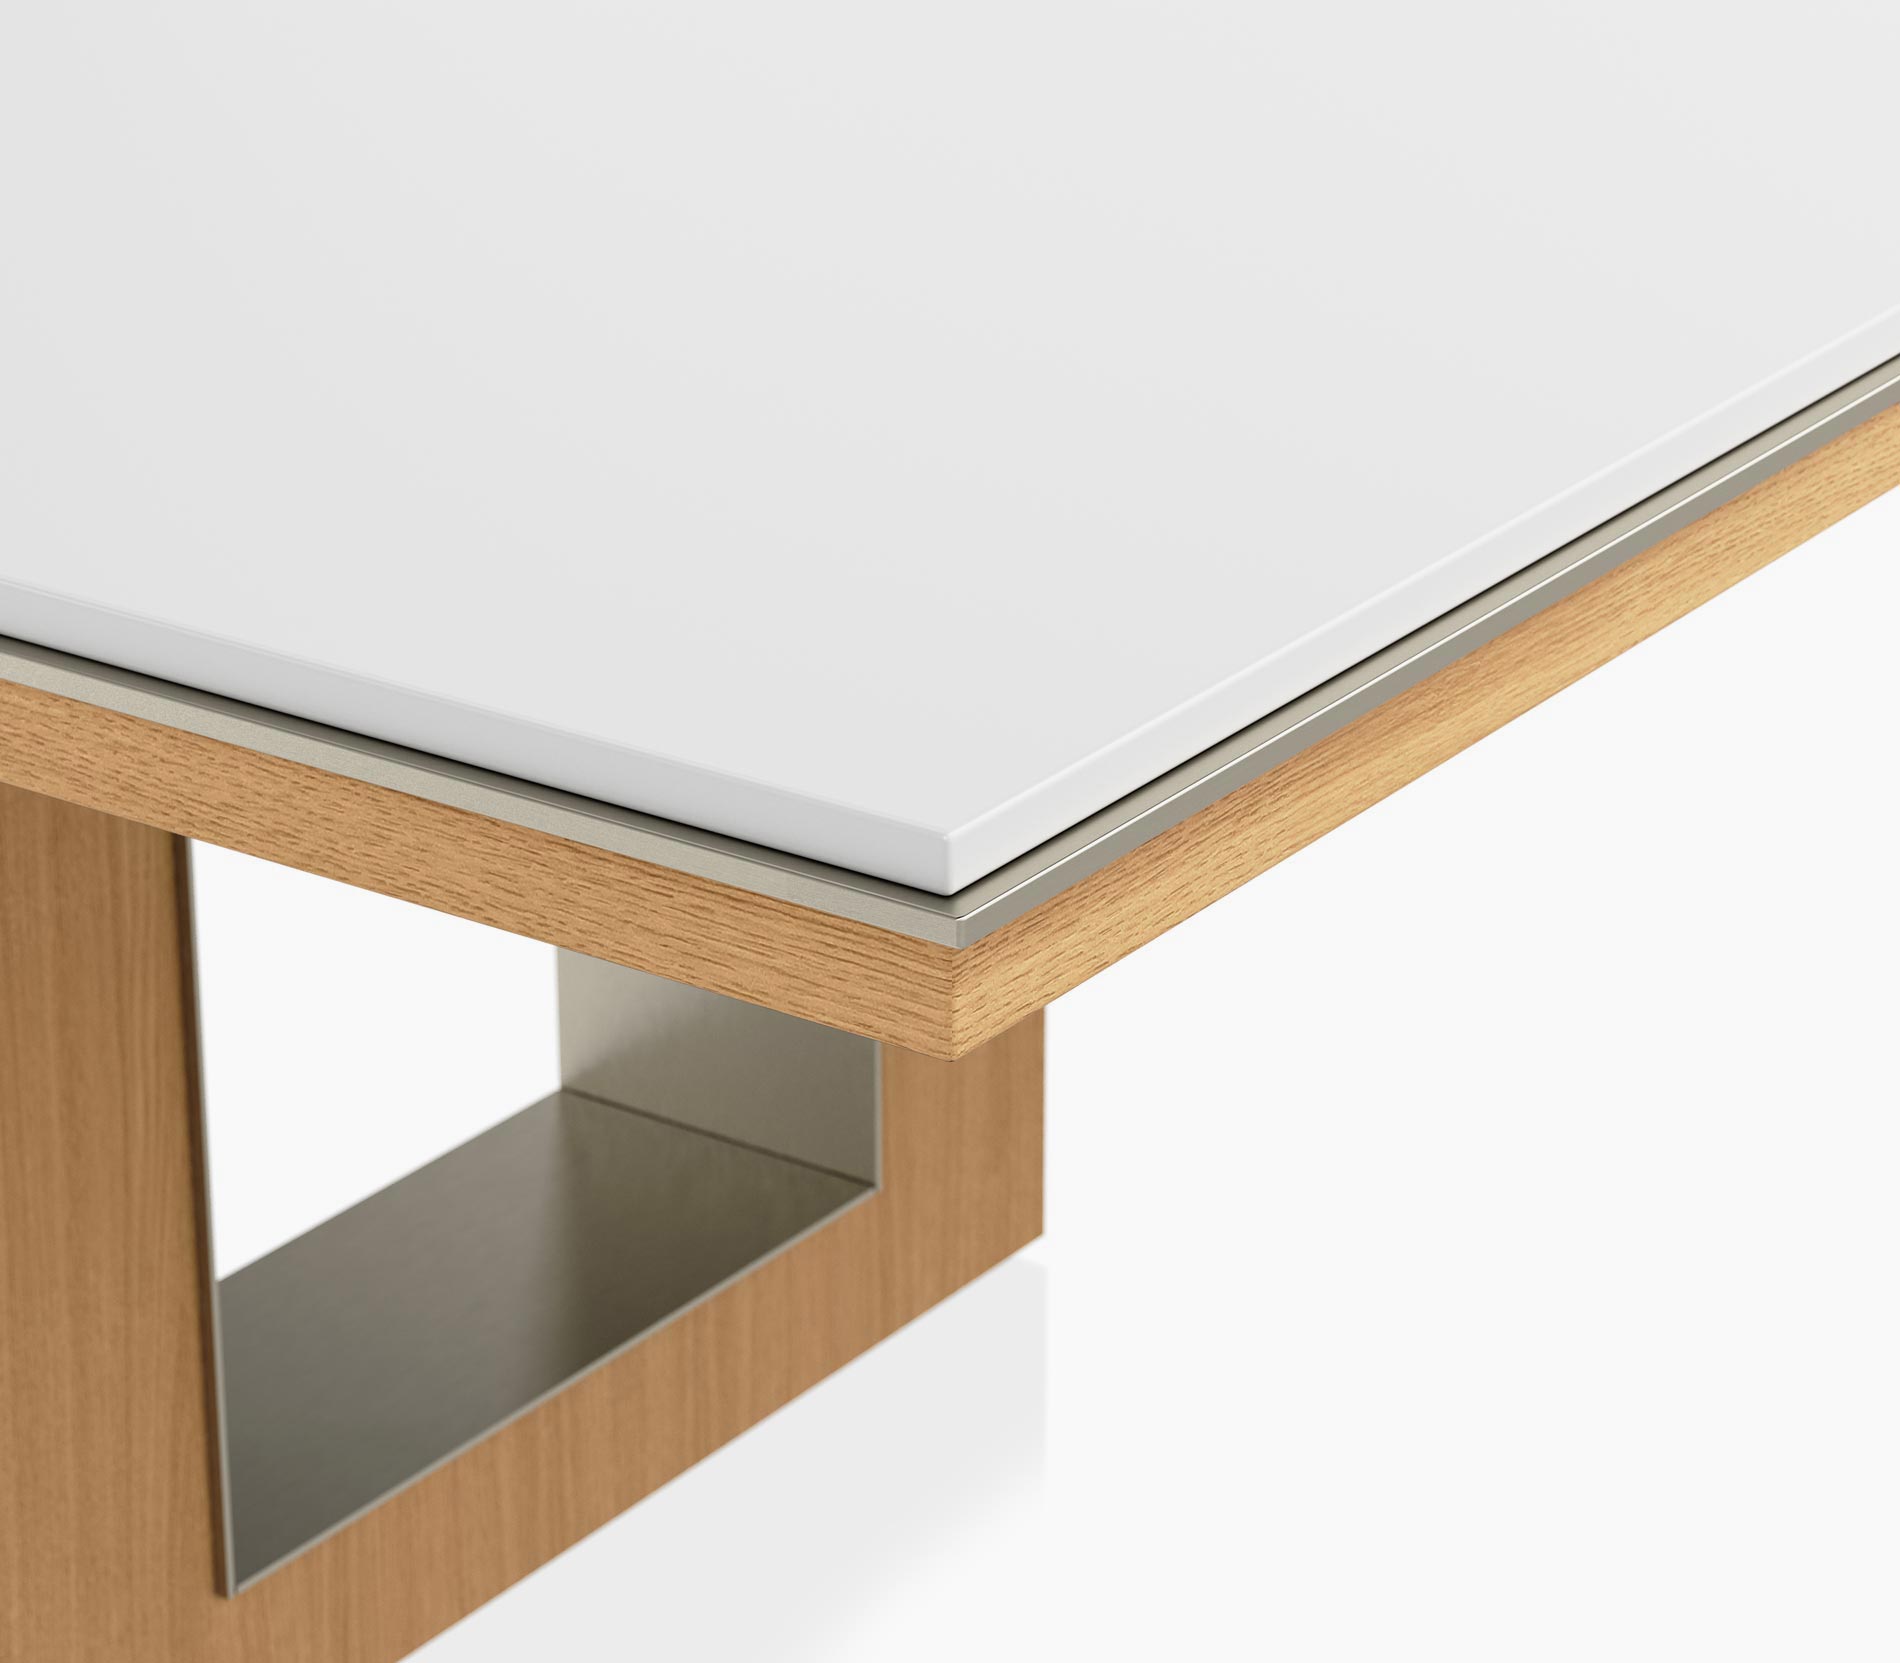 Edge detail on a Highline Fifty Conference Table in glacier white corian and natural rift cut oak